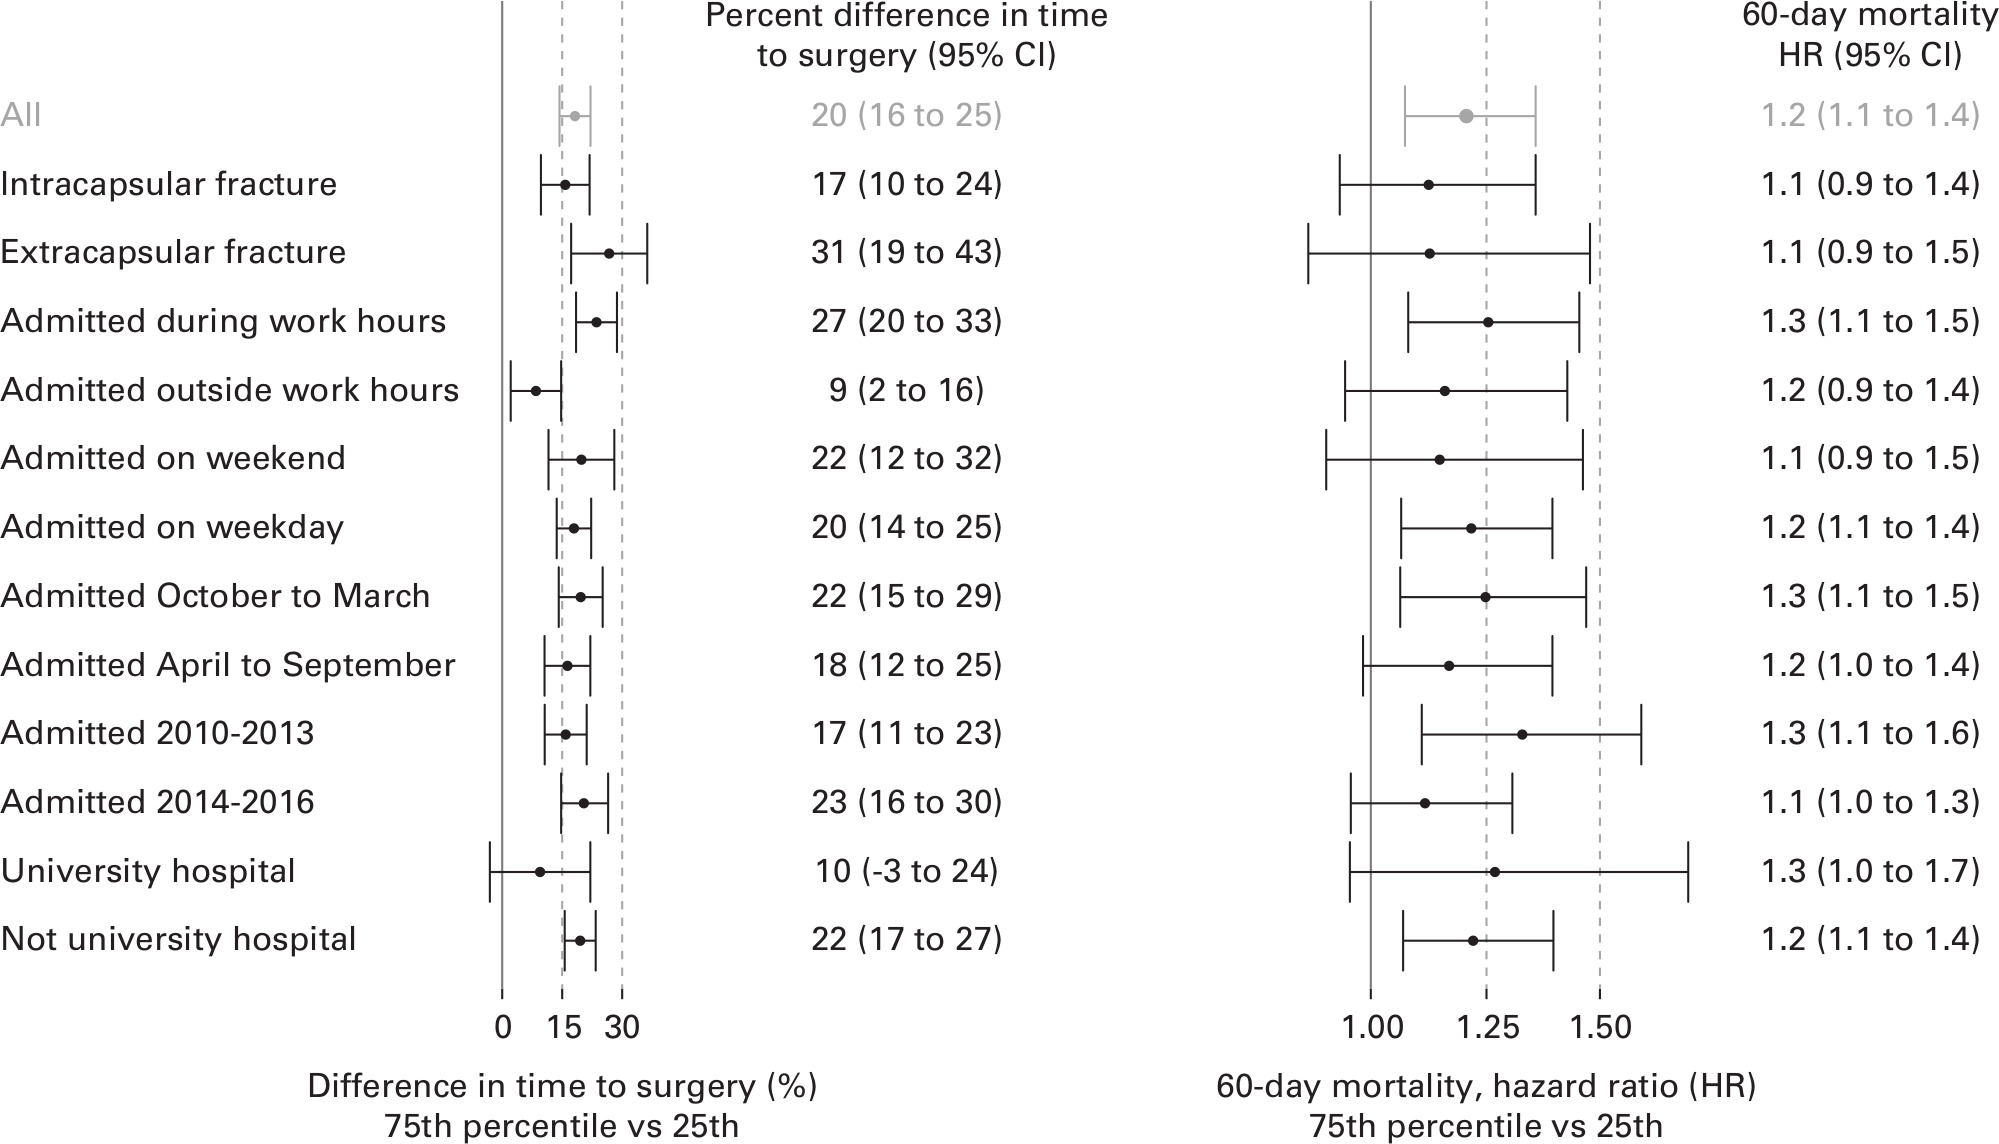 Fig. 2 
          Subgroup analyses of the estimated difference in time to surgery (left) and 60-day mortality (right) for hip fracture patients, including estimates of the difference between the higher and lower quartiles of recently admitted surgical patients. The associations were calculated by comparing patients admitted at the same hospital, during the same month, on similar weekdays and times of the day, and were adjusted for age with a quadratic term, sex, S72.0-diagnosis, previous admission, and previous general practitioner visits. CI, confidence interval; HR, hazard ratio.
        